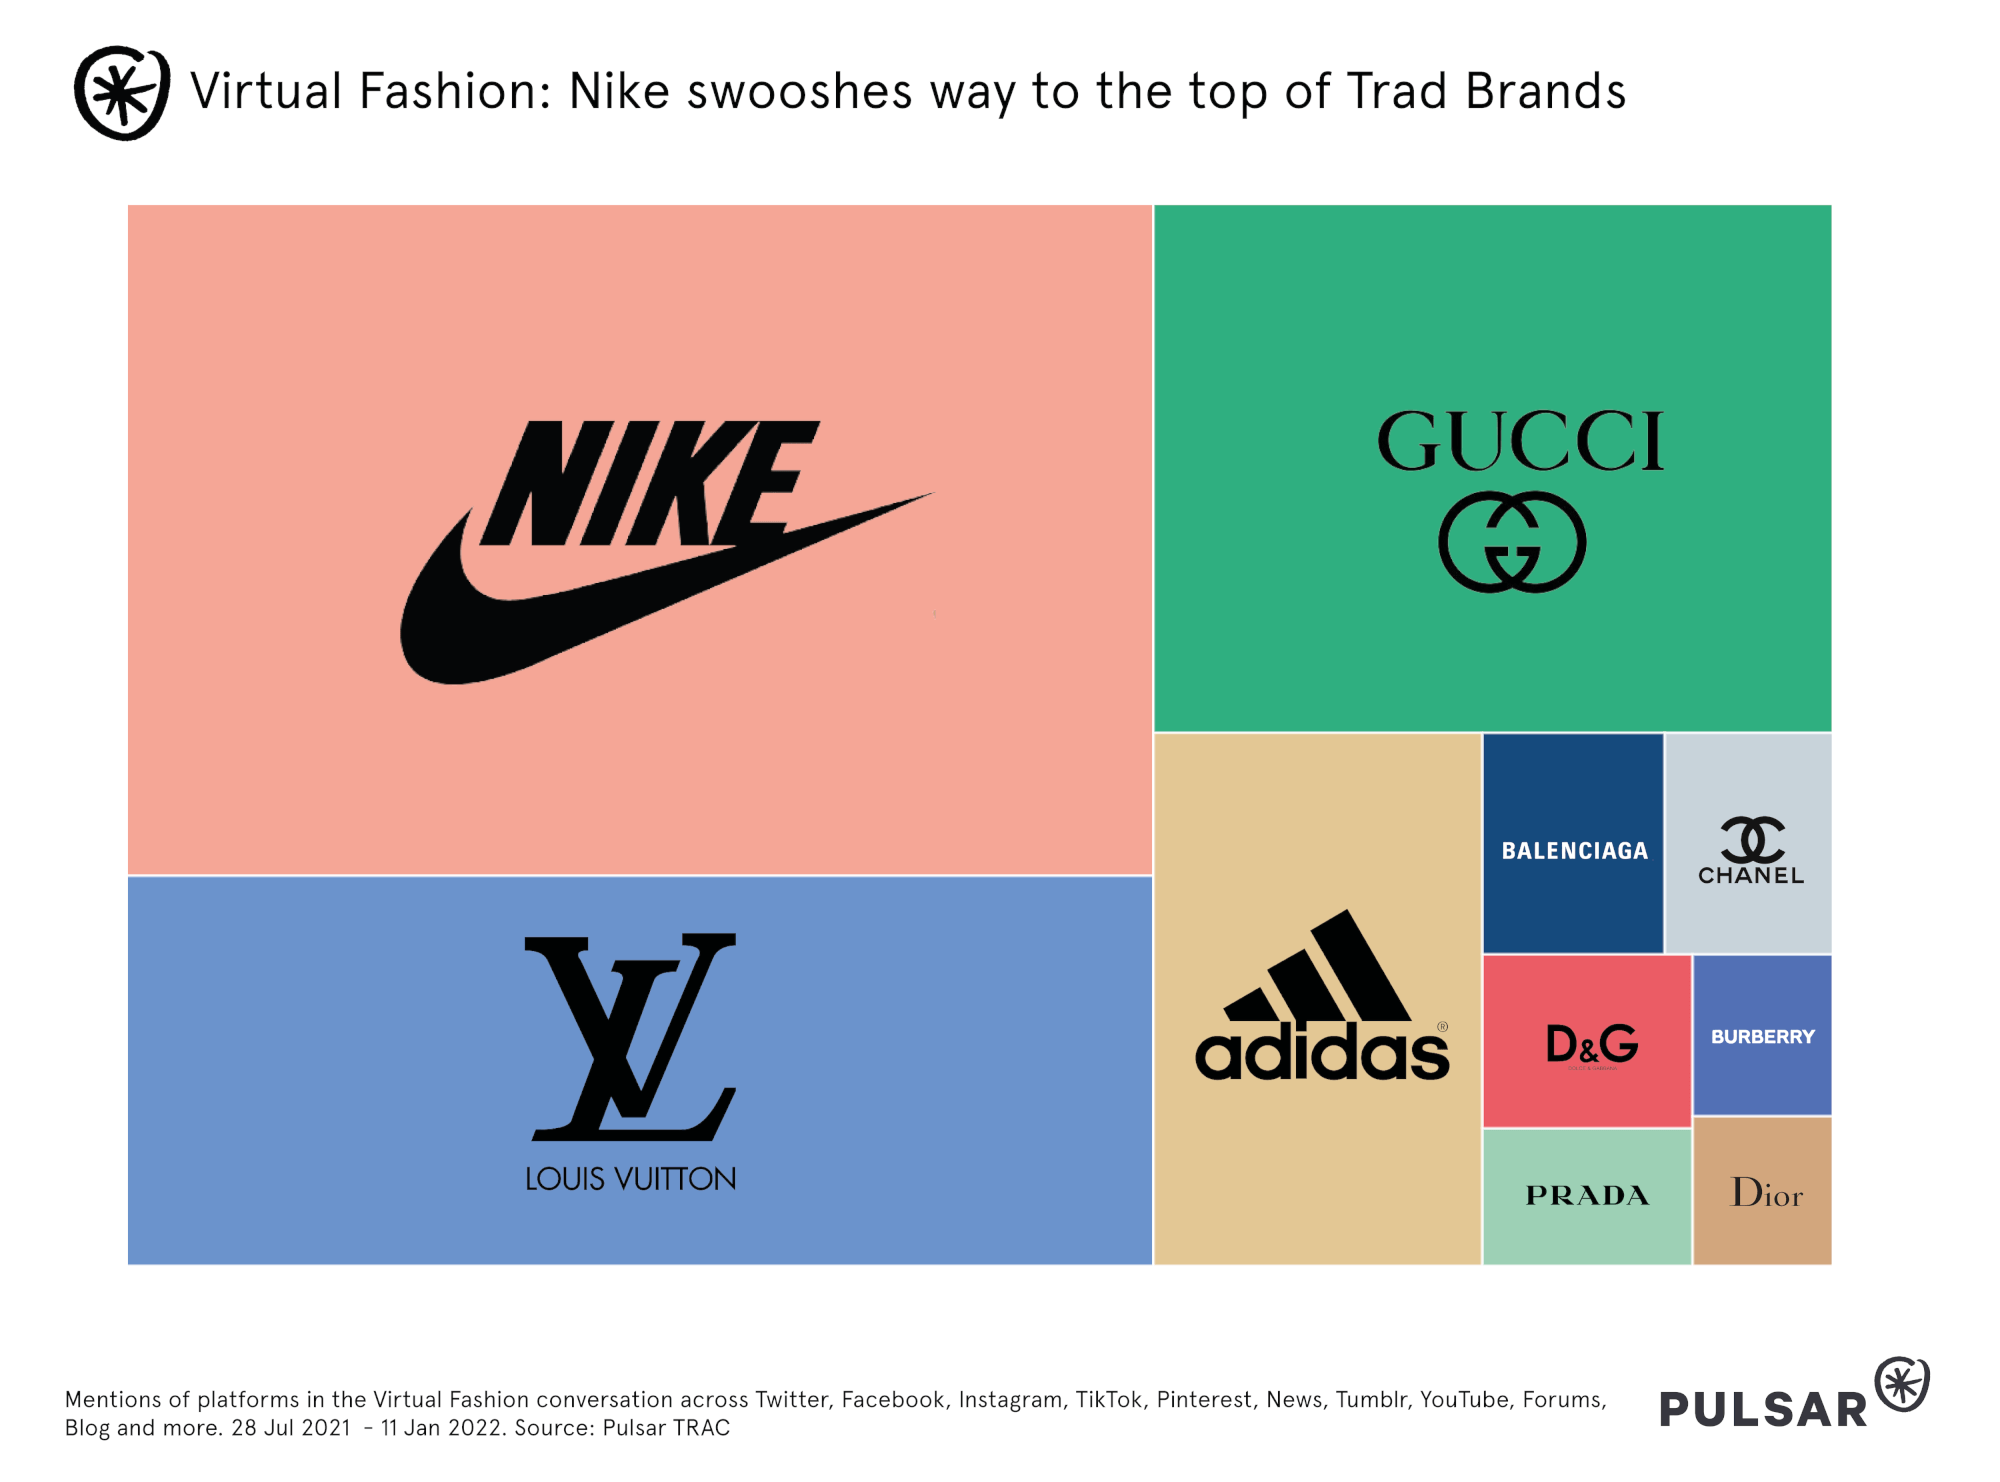 Virtual Fashion: Nike swooshes way to the top of Trad Brands